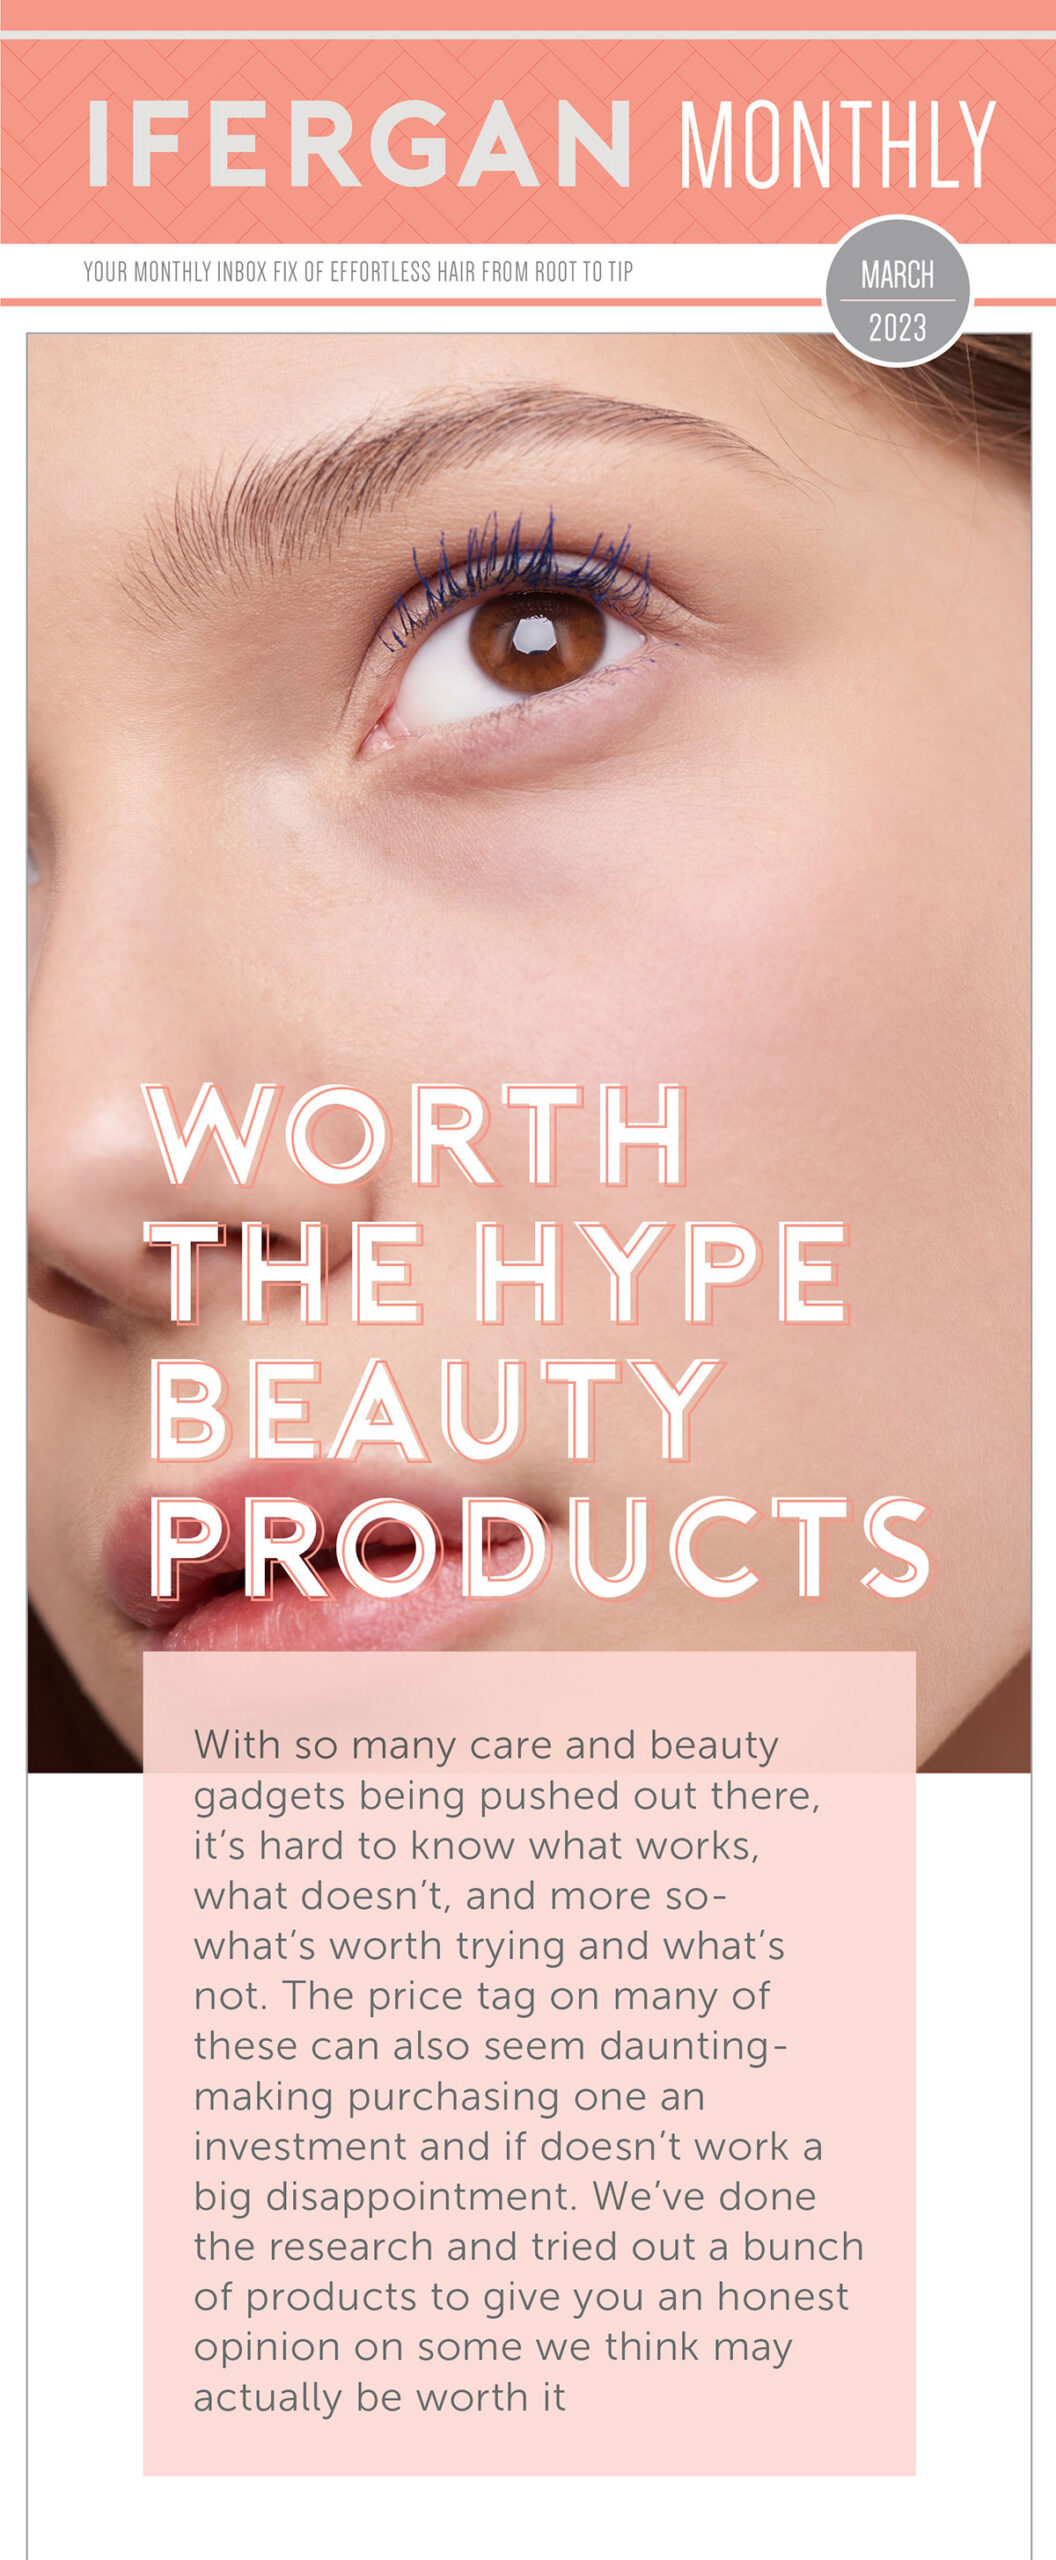 Worth The Hype Beauty Products With so many care and beauty gadgets being pushed out there, it’s hard to know what works, what doesn’t, and more so- what's worth trying and what’s not. The price tag on many of these can also seem daunting- making purchasing one an investment and if doesn’t work a big disappointment. We’ve done the research and tried out a bunch of products to give you an honest opinion on some we think may actually be worth it!